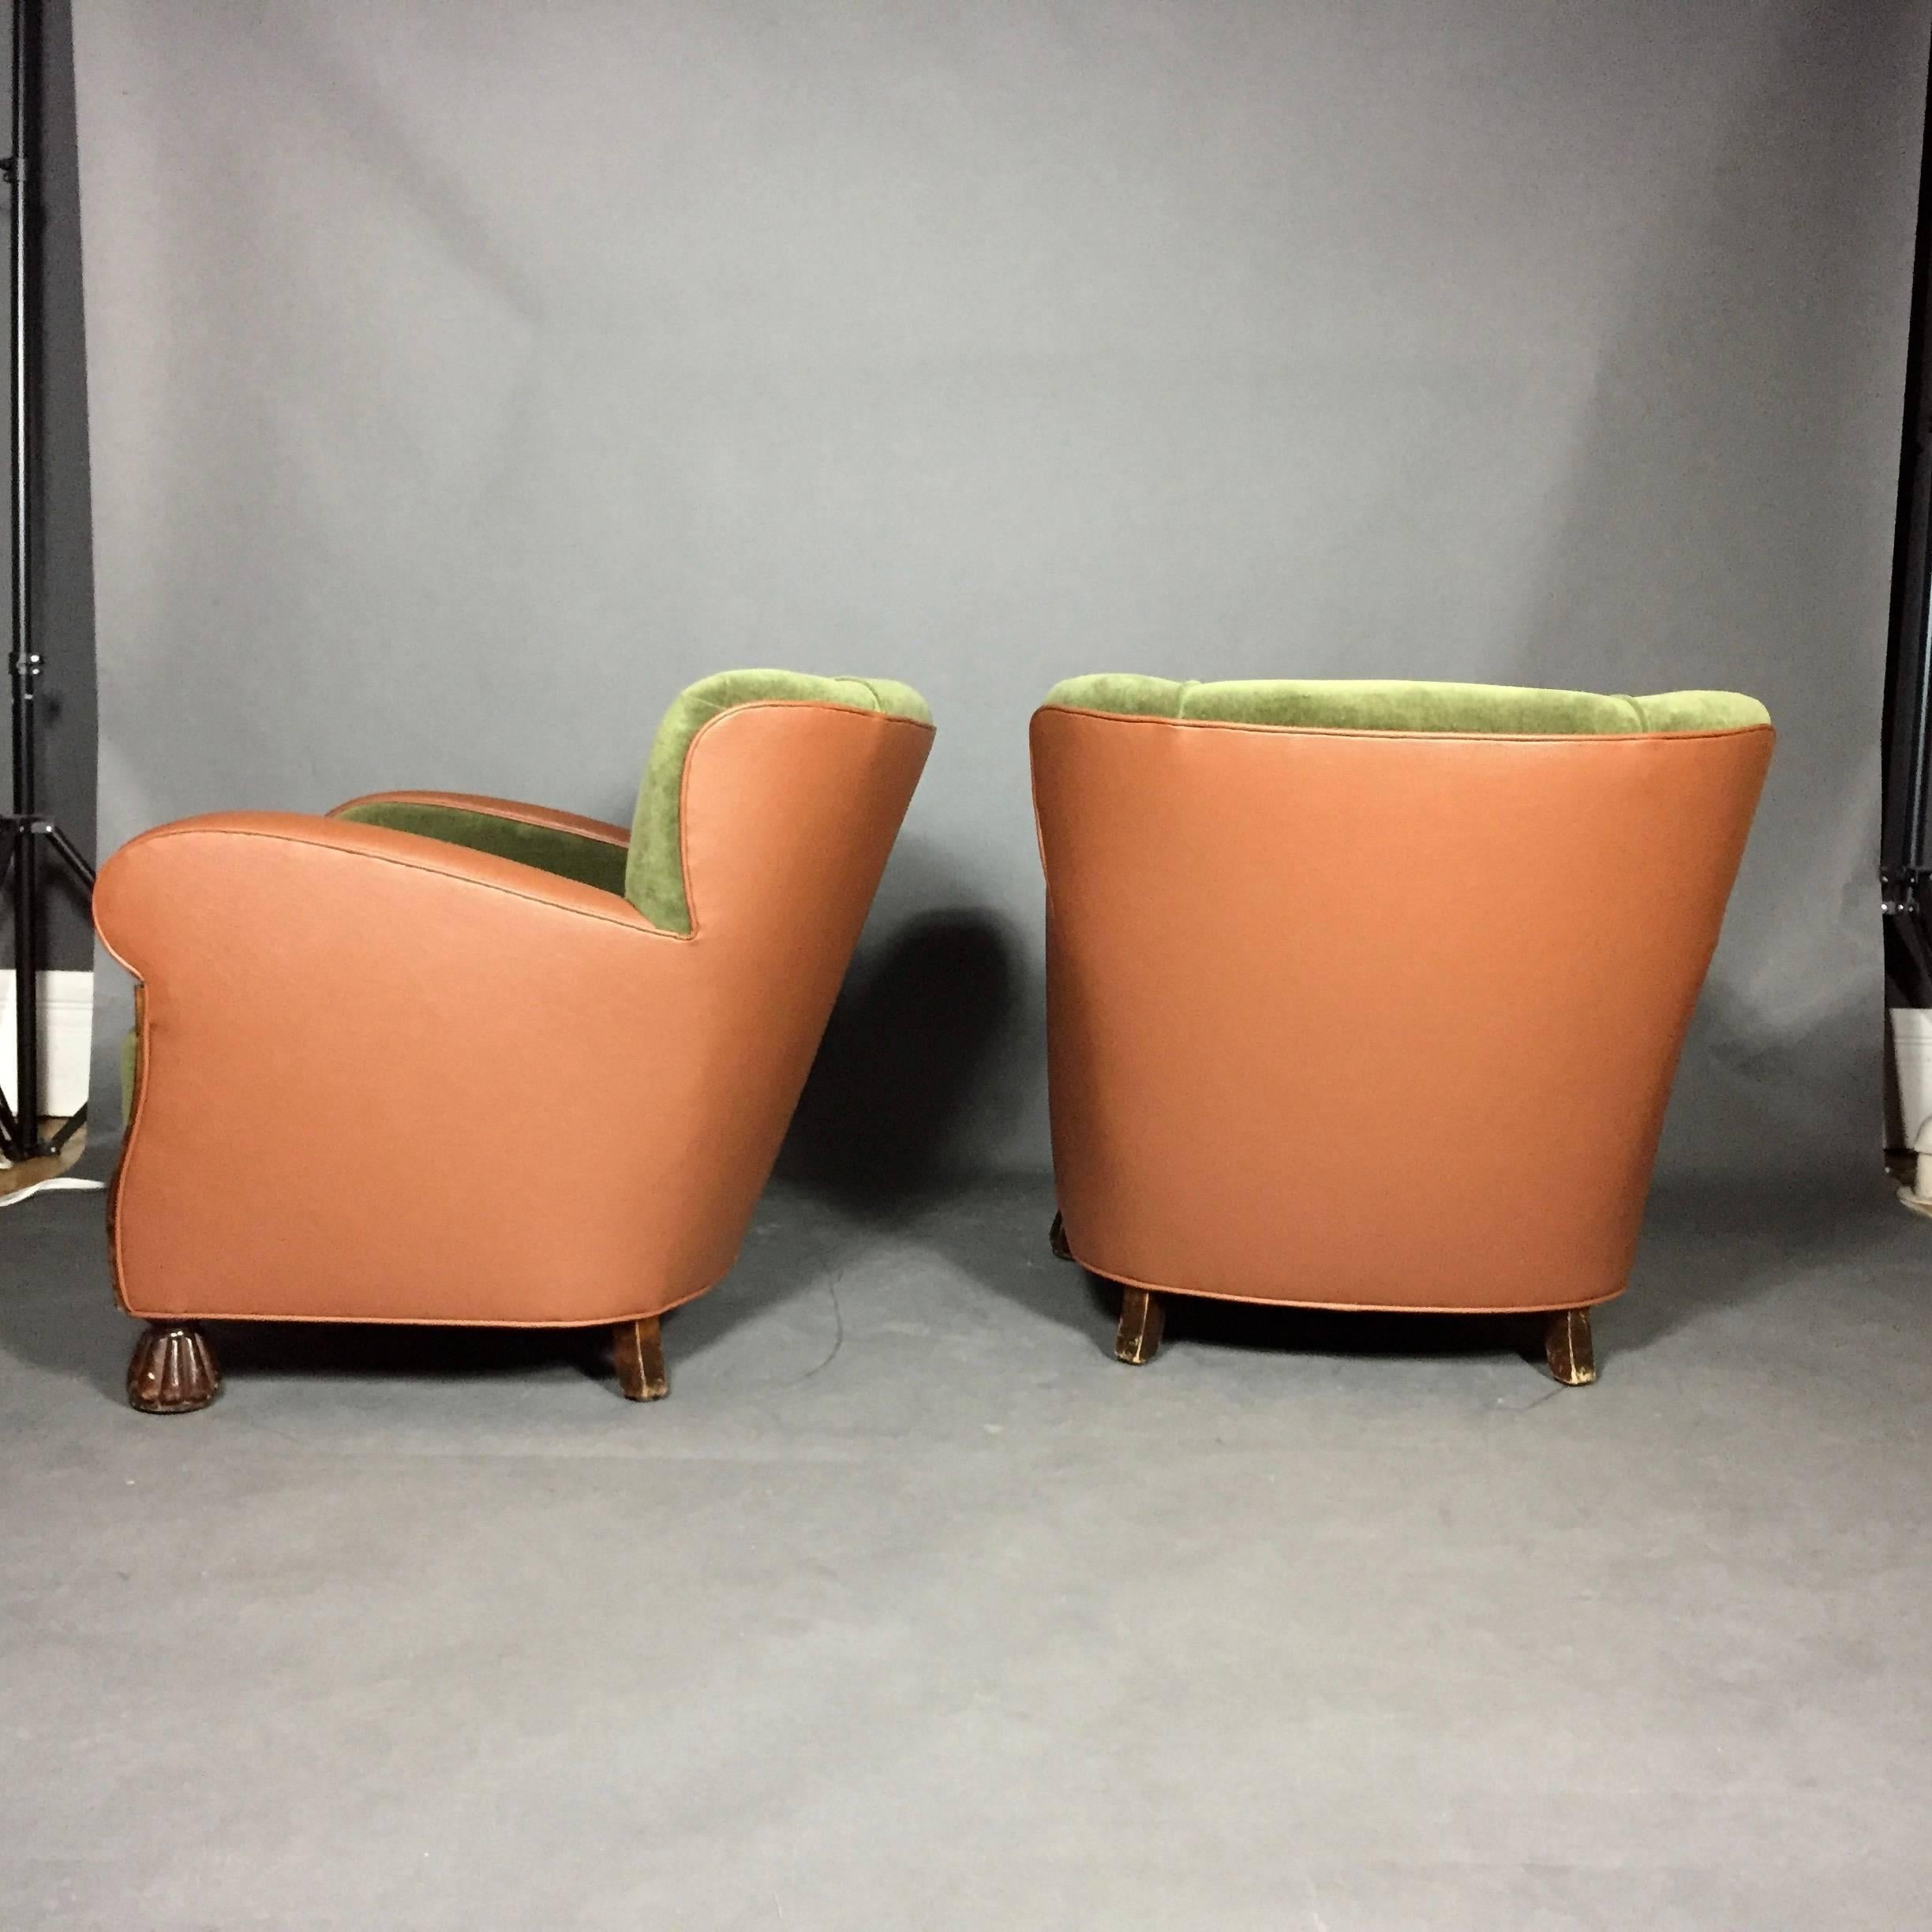 Baroque Revival Pair of Belgian 1930s Club Chairs, New Leather and Velvet Covers